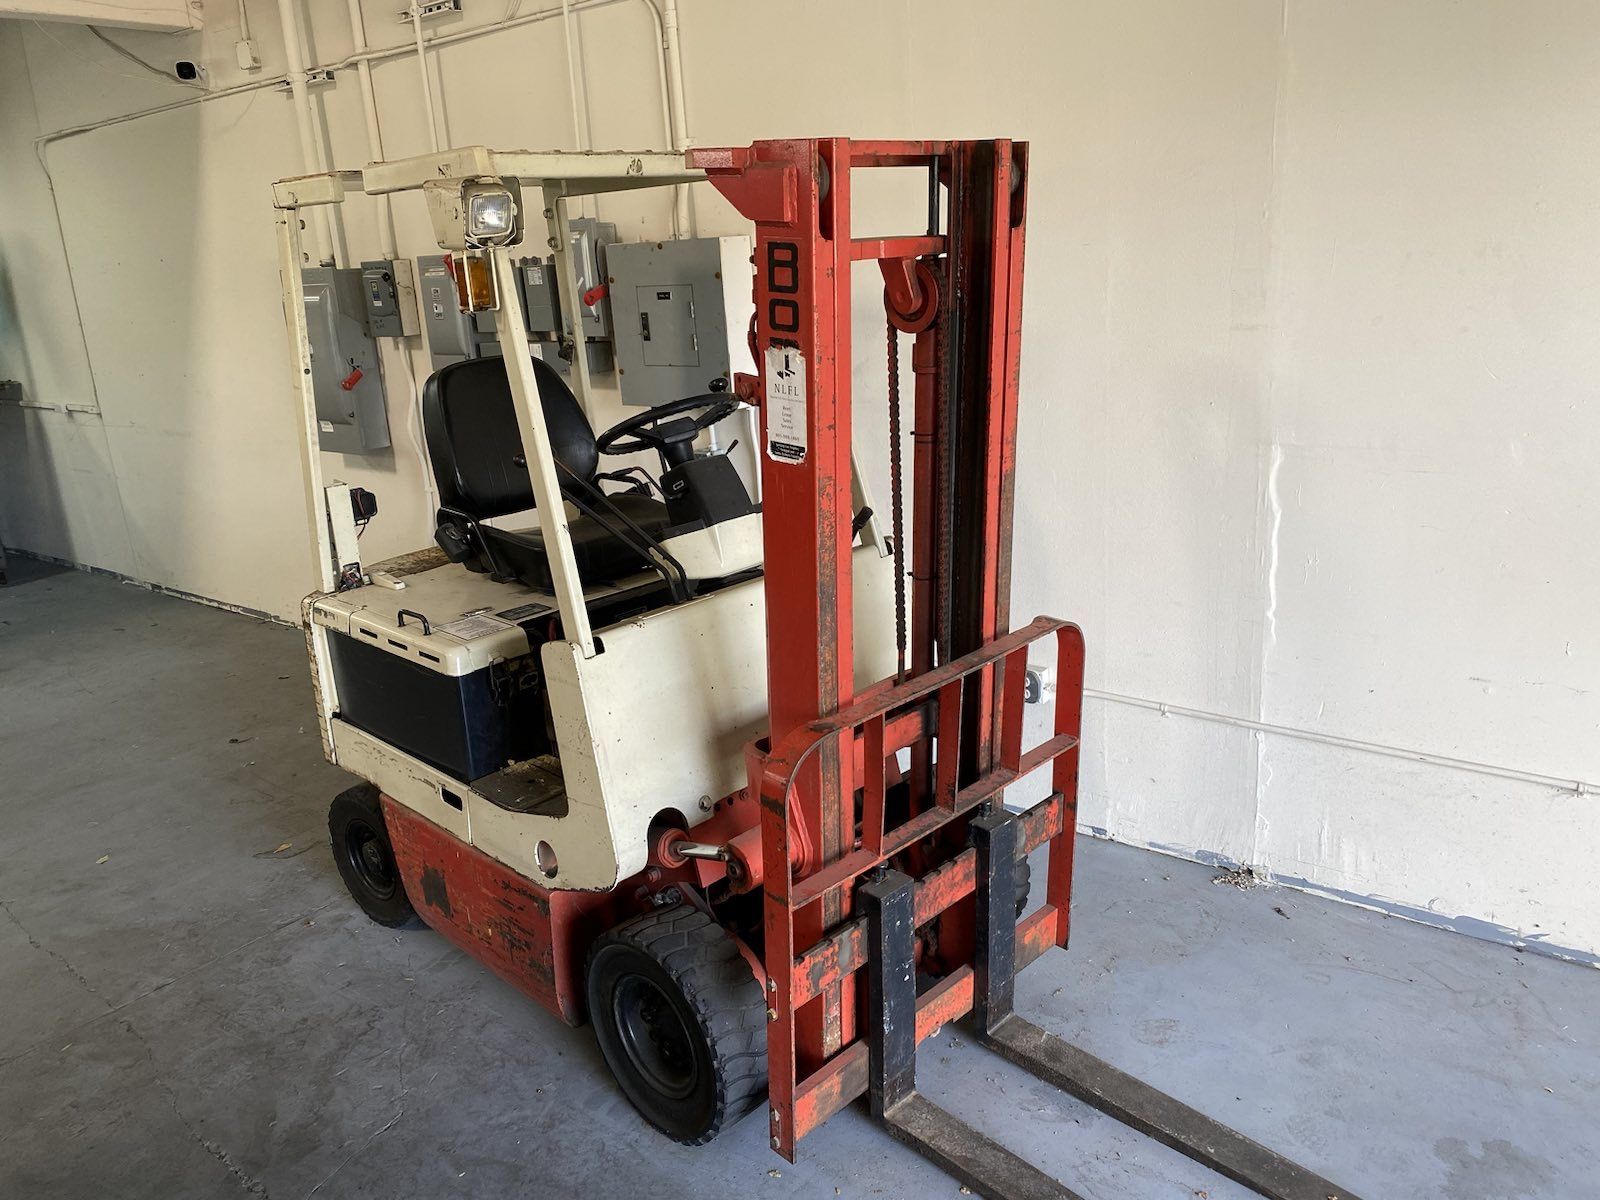 Toyota Electric Forklift 